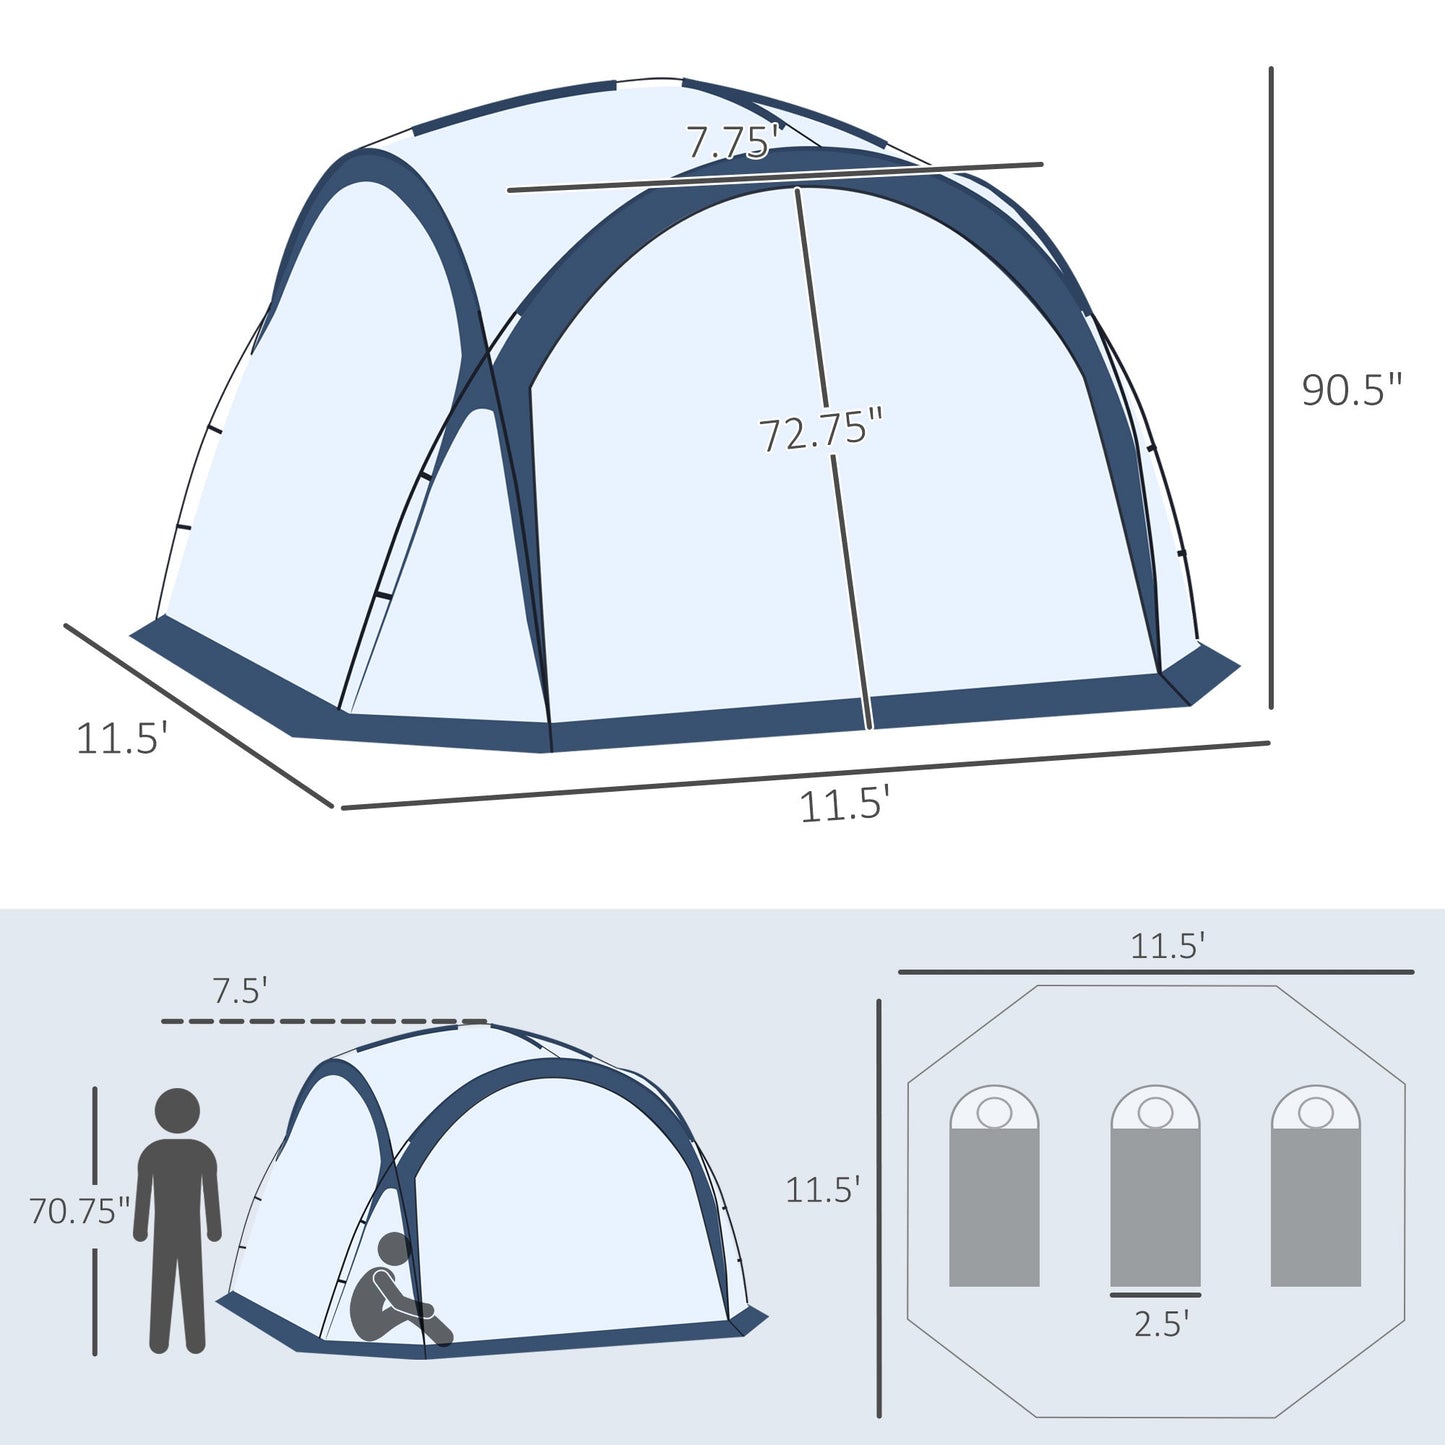 Miscellaneous-Large Screen Tent, 11.5' x 11.5'Shade Tent,Hang Hook for Lantern at Night, 6-8 Person Dome Tent, White - Outdoor Style Company